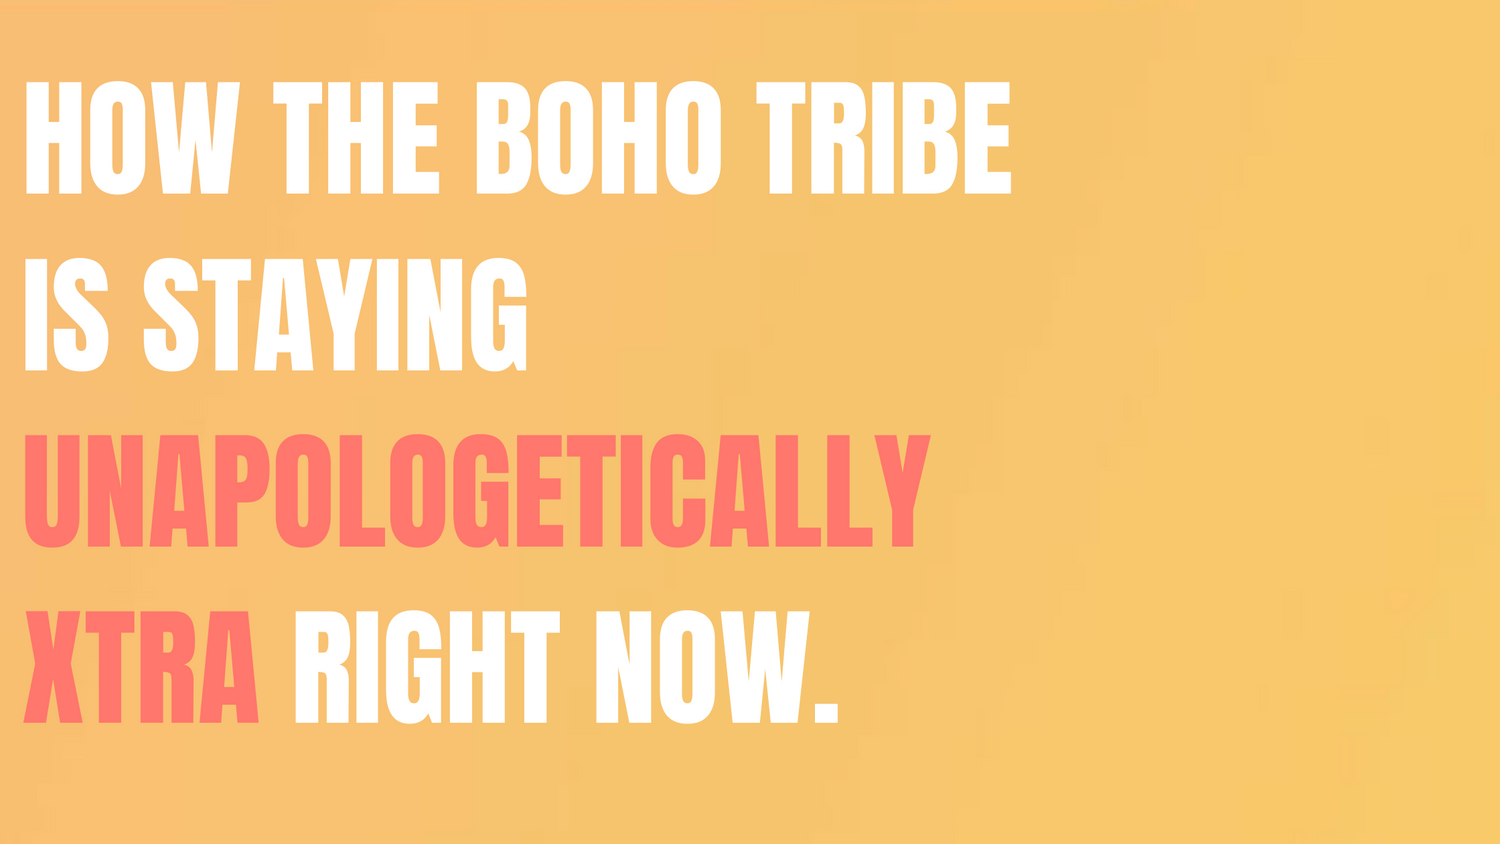 How The Boho Tribe is Staying Unapologetically Xtra Right Now.